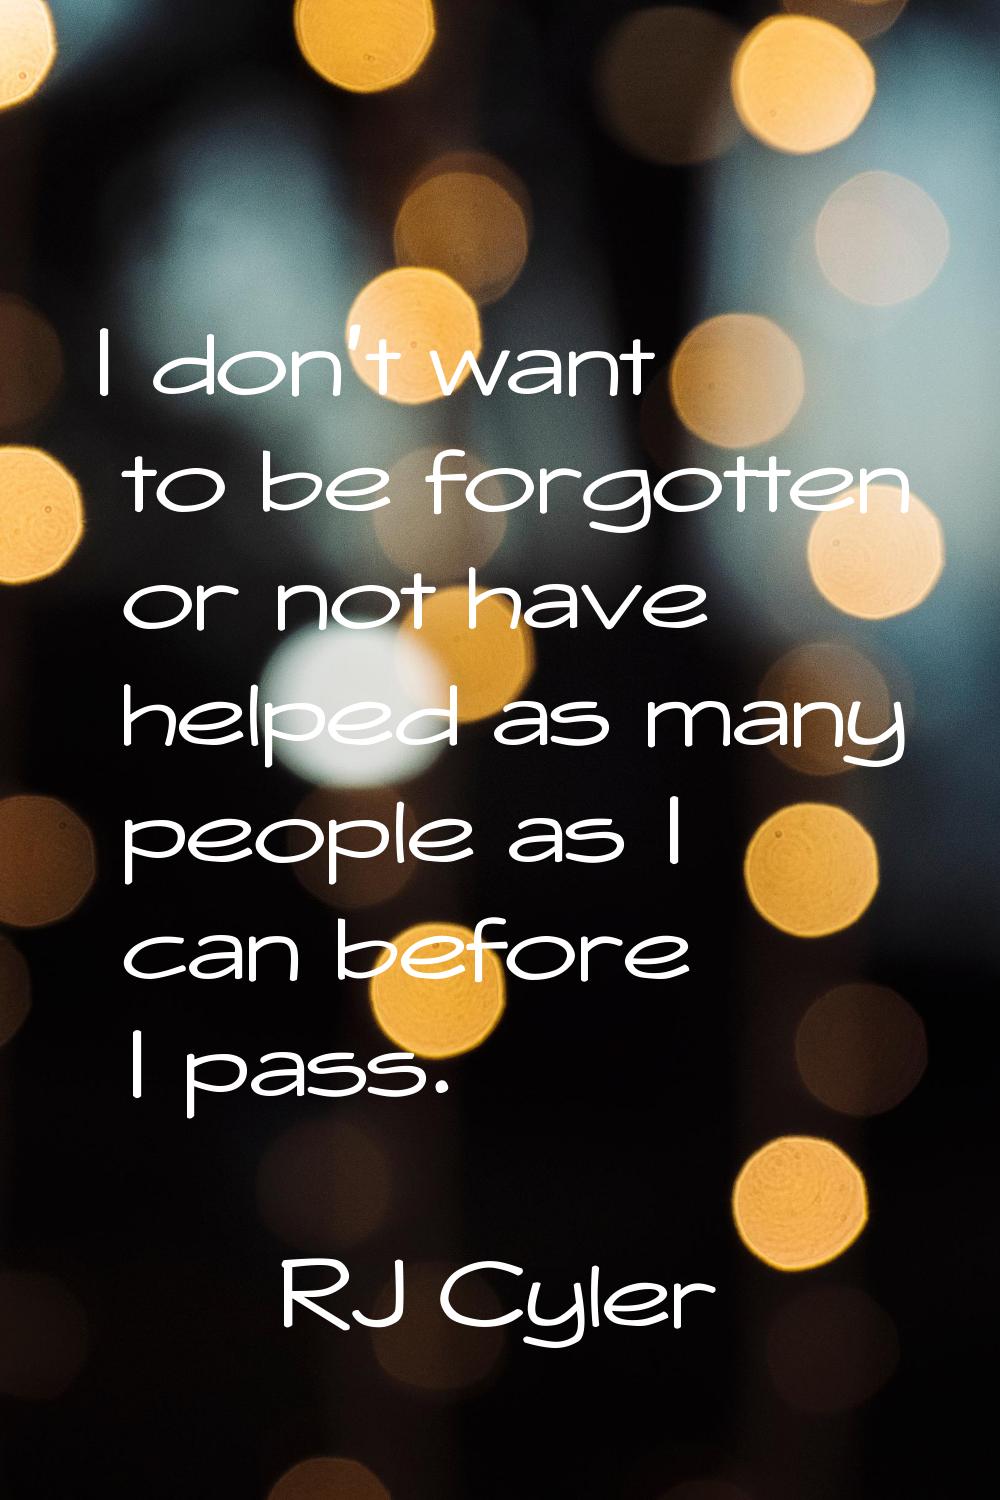 I don't want to be forgotten or not have helped as many people as I can before I pass.